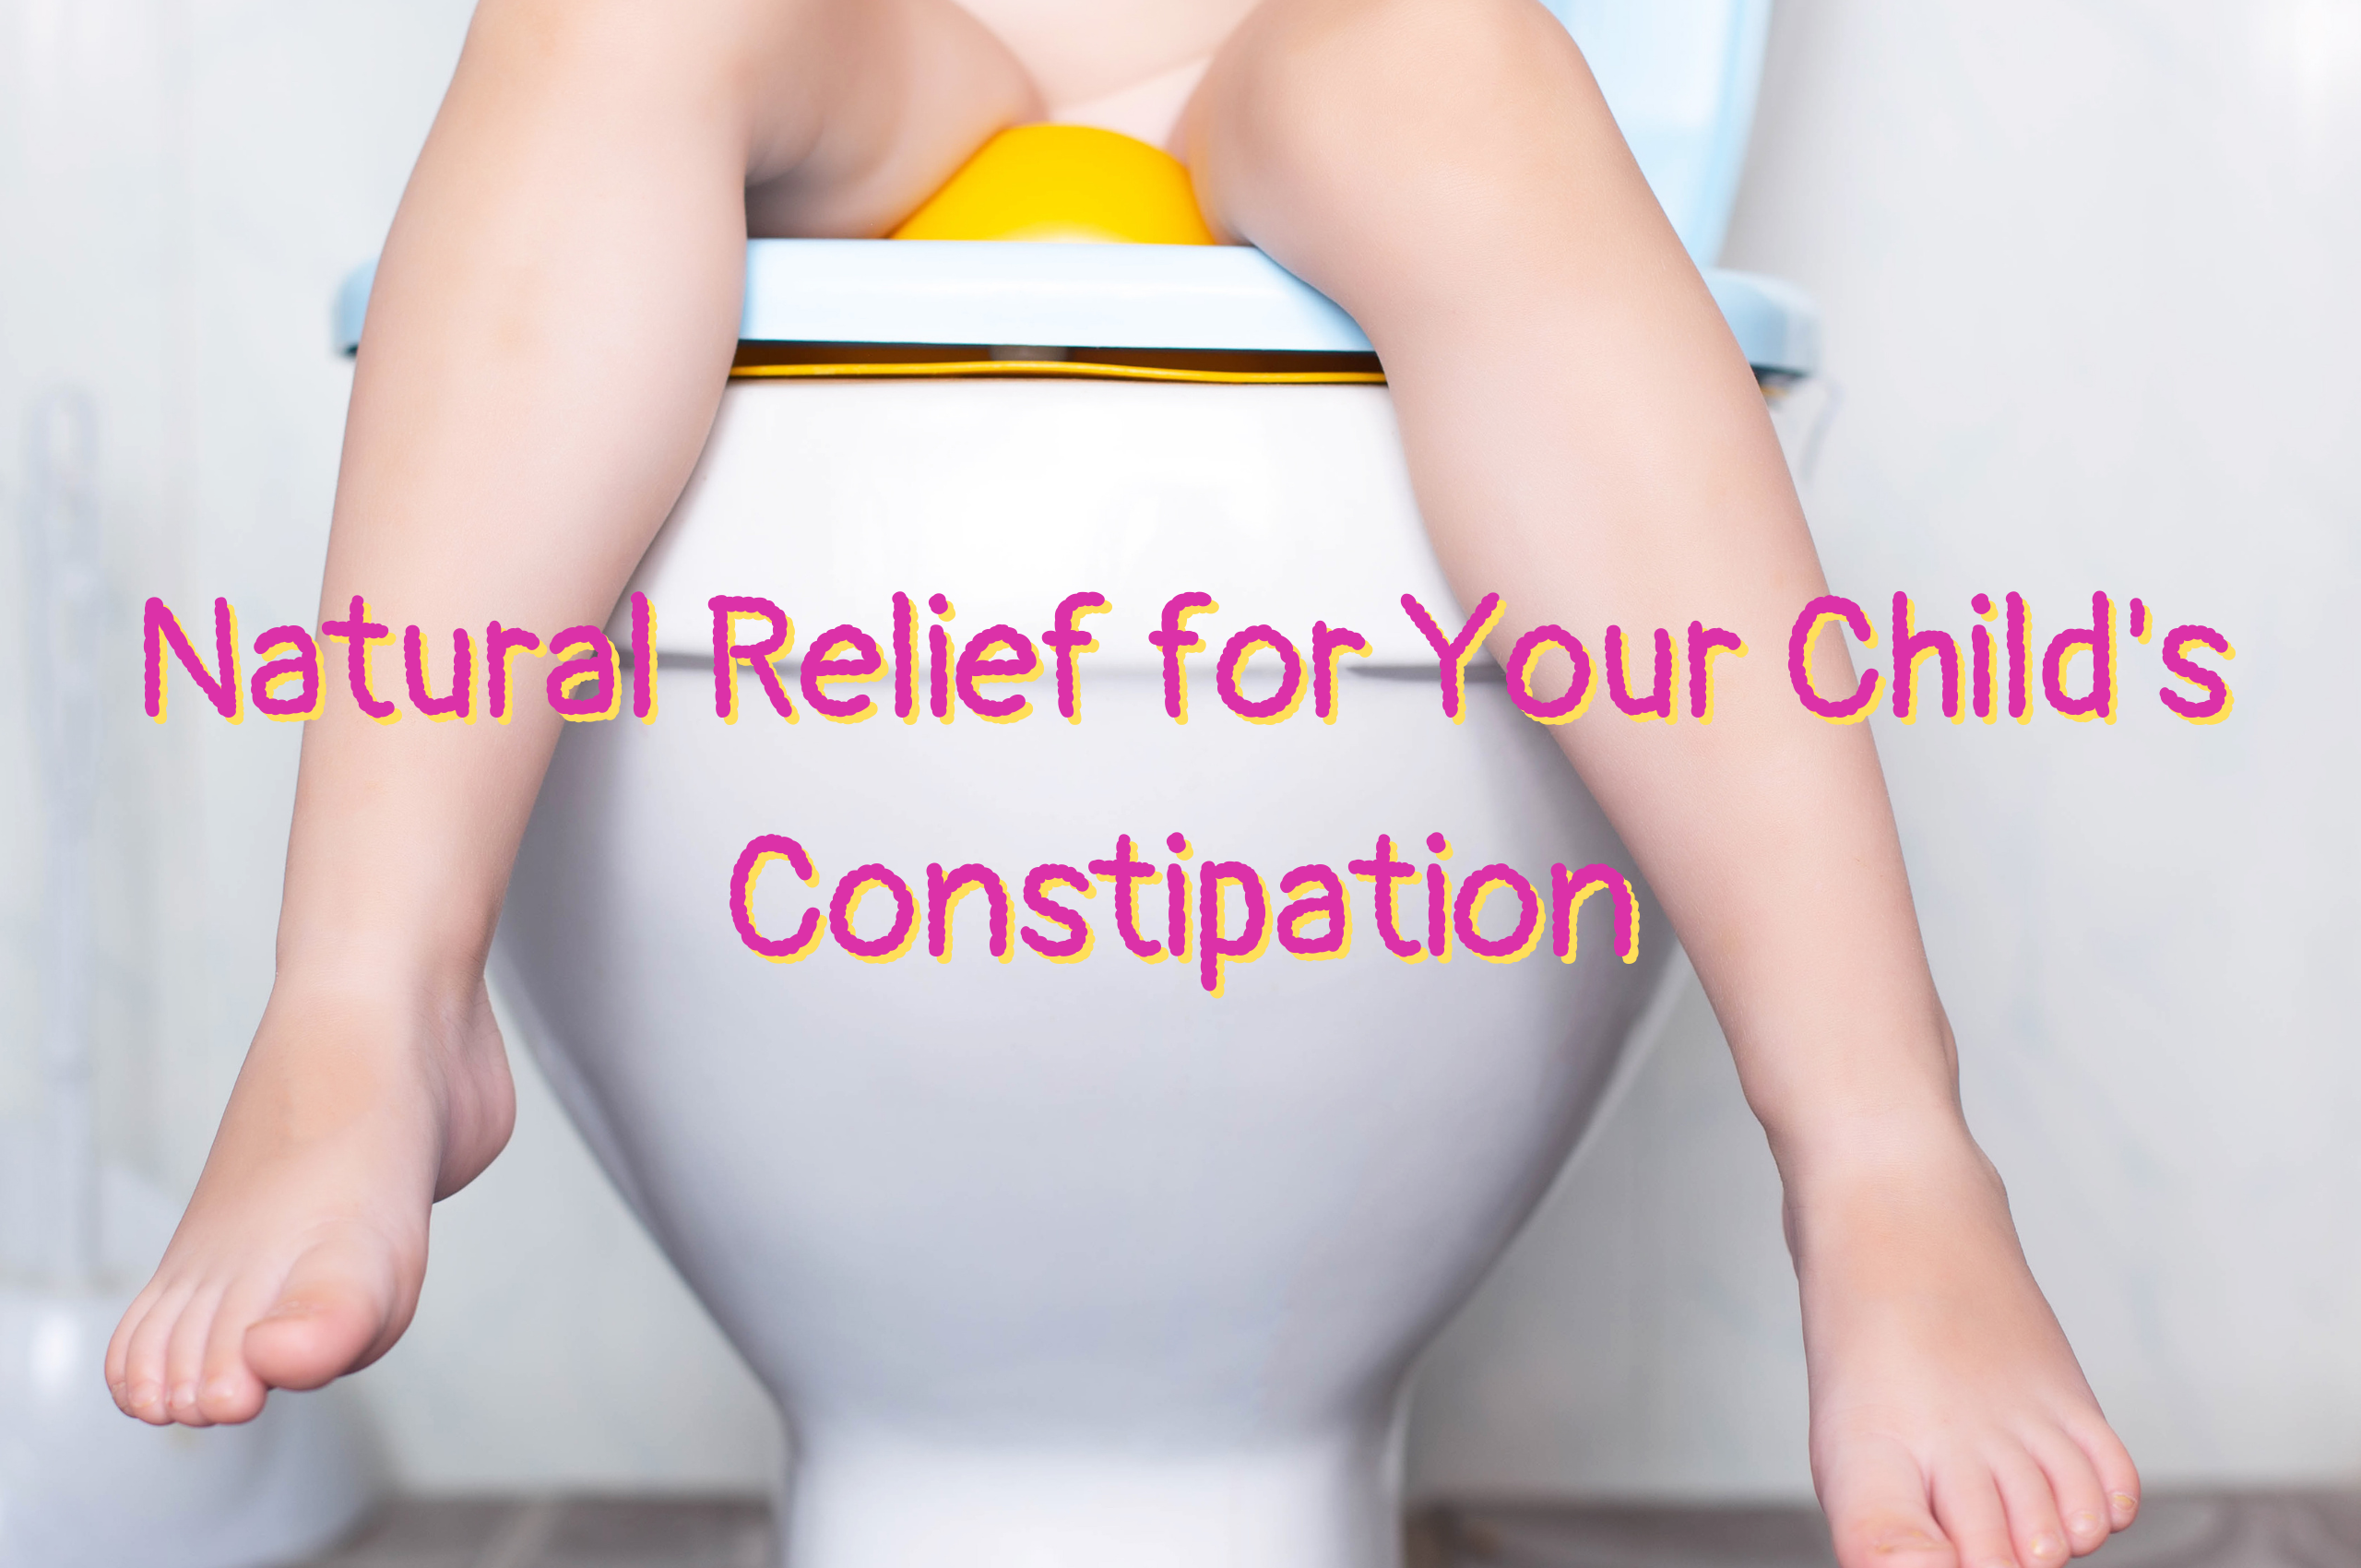 Natural Relief for Your Child's Constipation